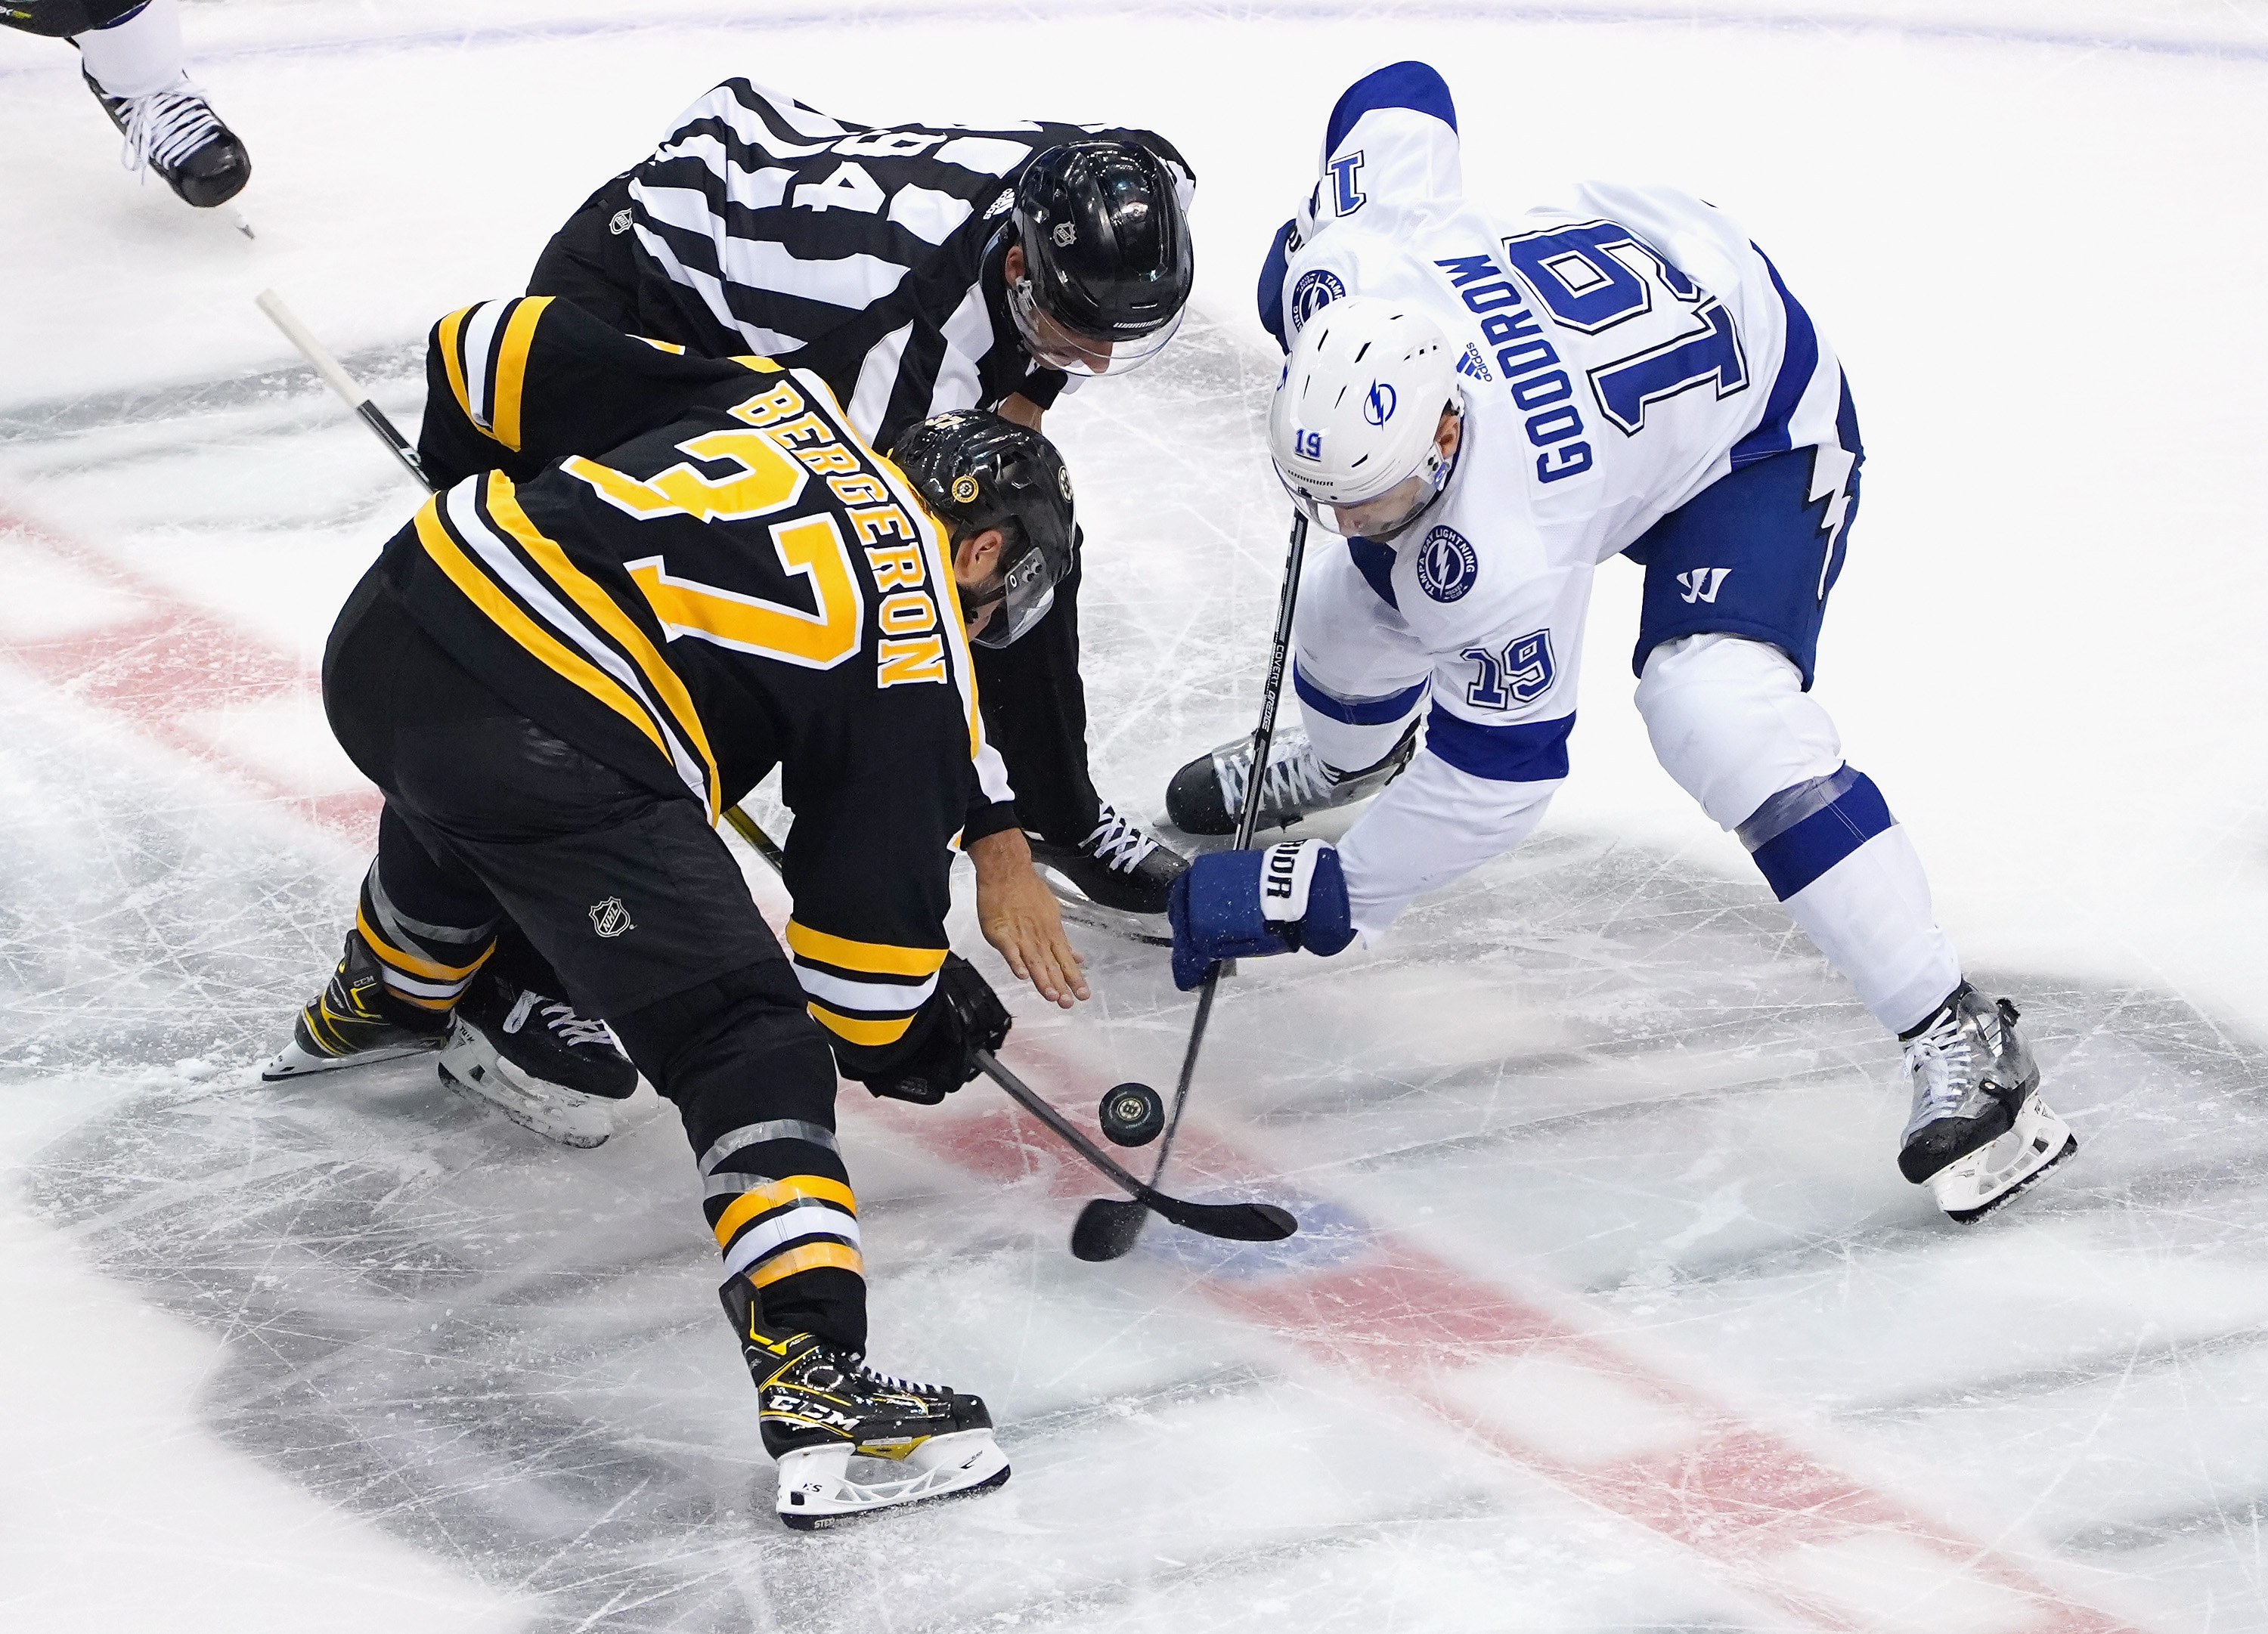 Boston Bruins Nick Ritchie was buried vs. Carolina, could be